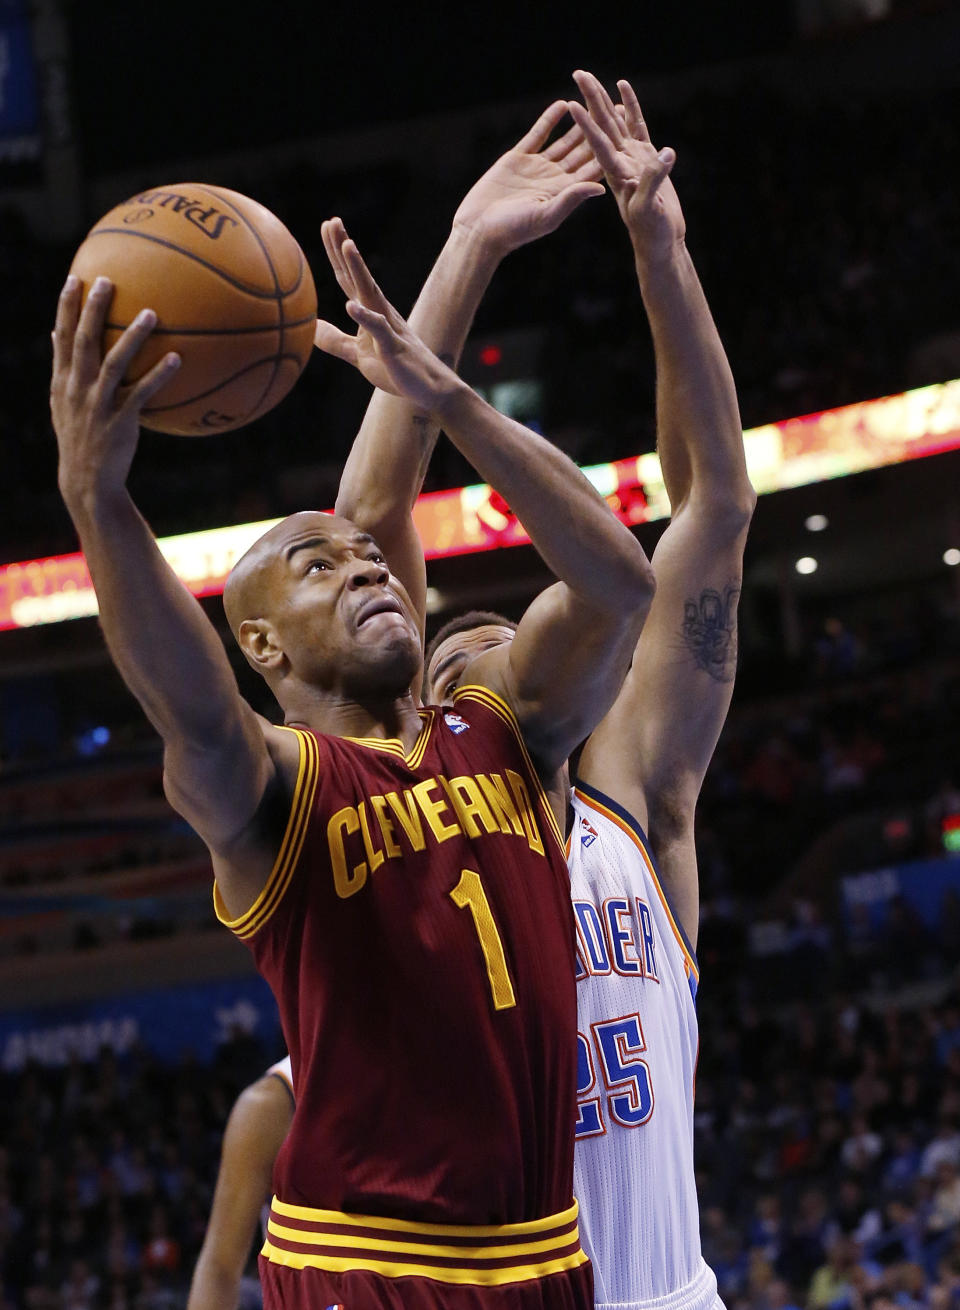 Cleveland Cavaliers guard Jarrett Jack (1) shoots in front of Oklahoma City Thunder guard Thabo Sefolosha (25) during the first quarter of an NBA basketball game in Oklahoma City, Wednesday, Feb. 26, 2014. (AP Photo/Sue Ogrocki)